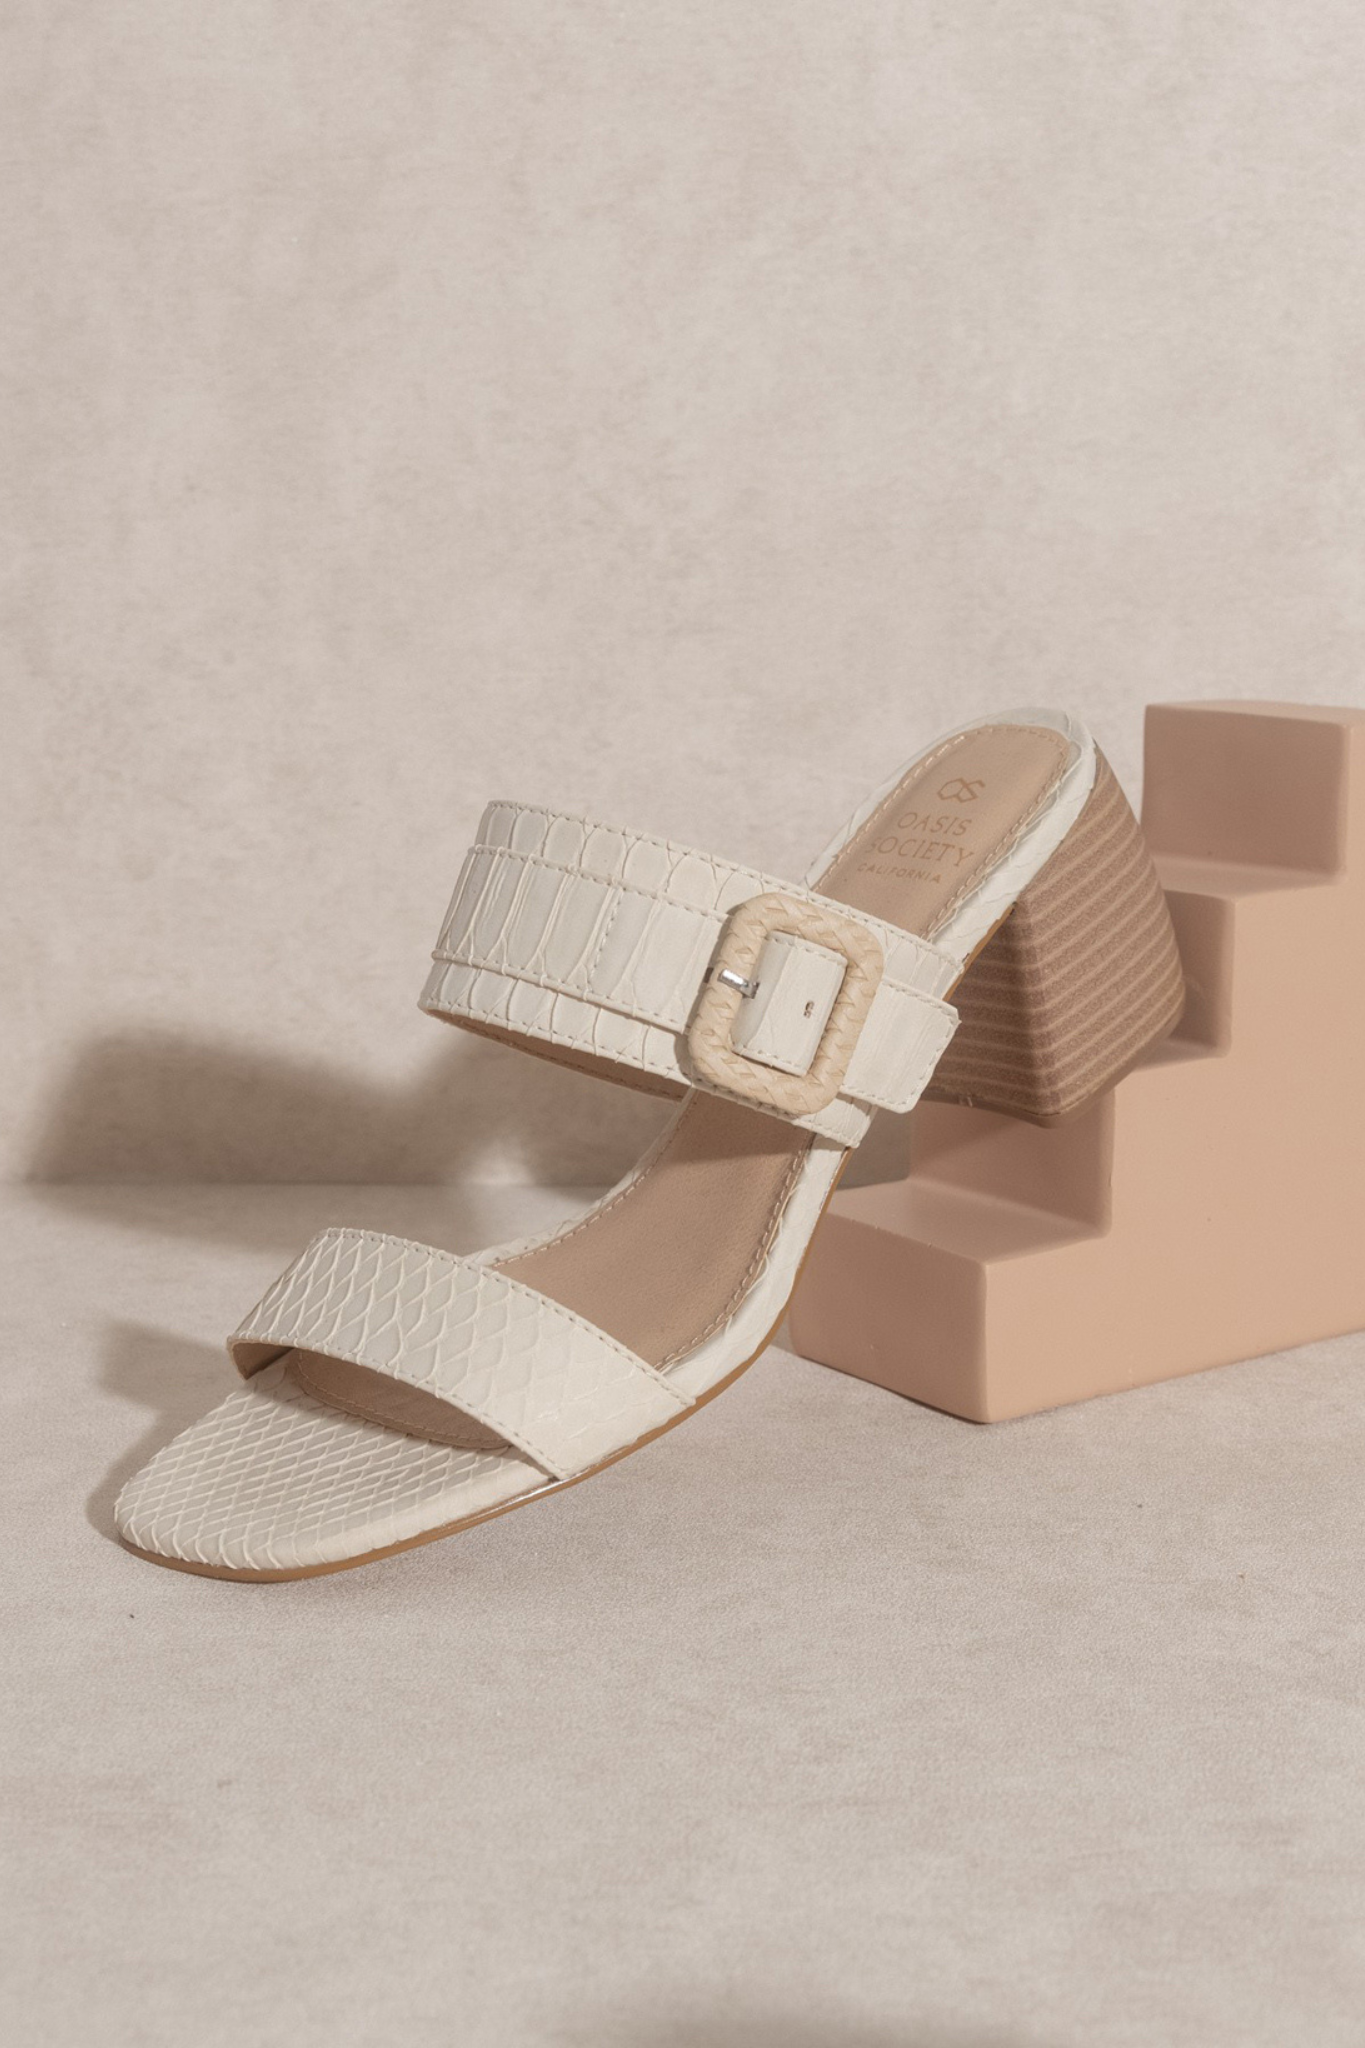 View 4 of Nicole Buckle Block Heel in Off White, a Shoes from Larrea Cove. Detail: .